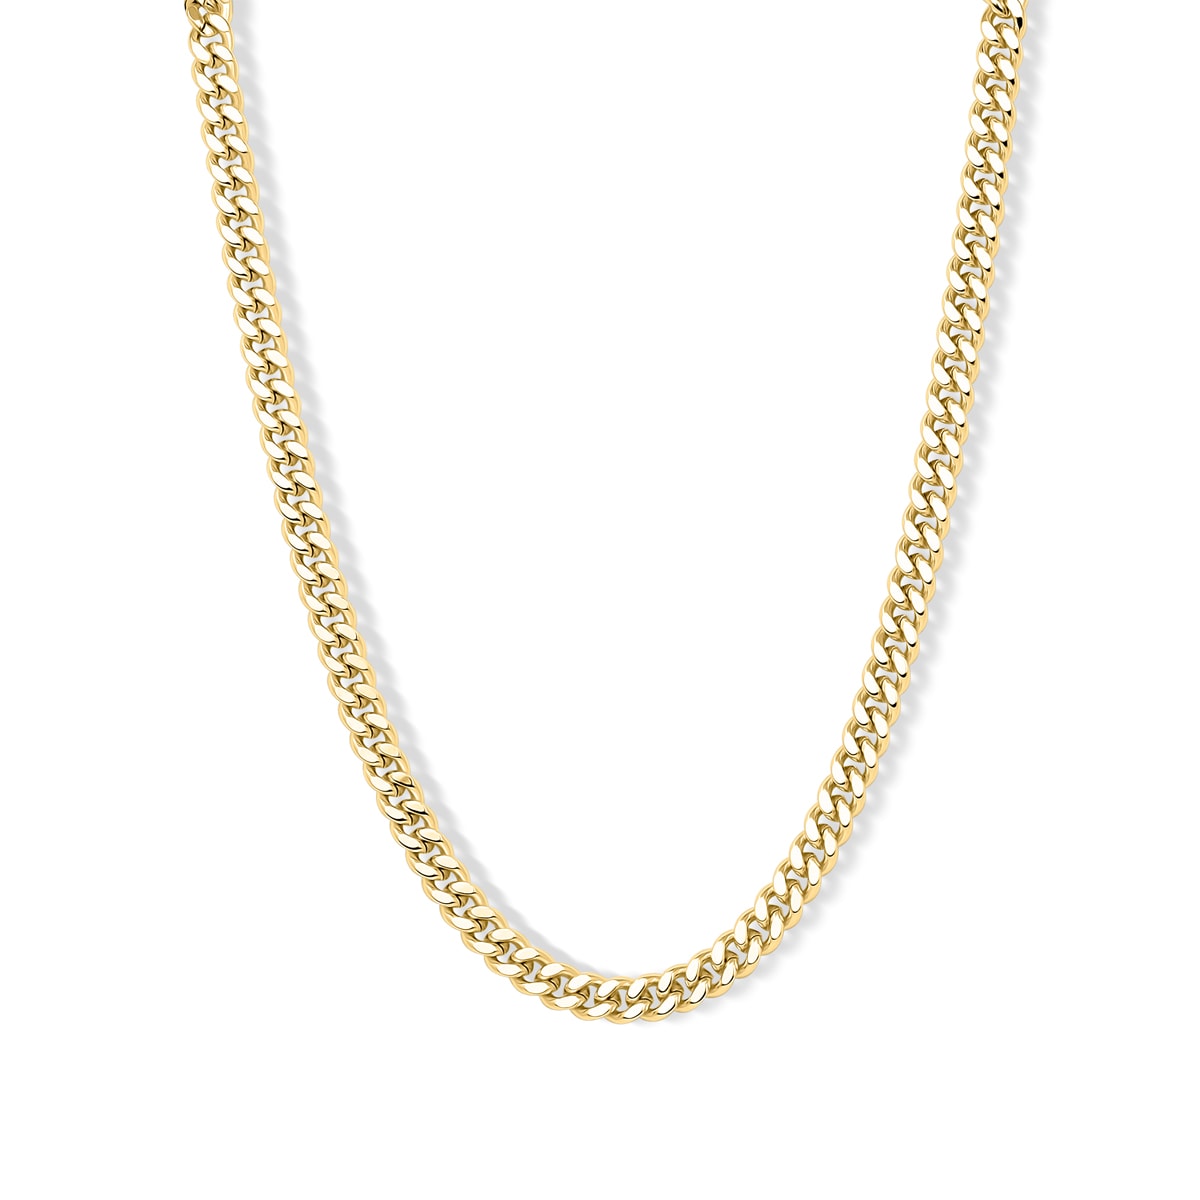 Bold gold chain necklace